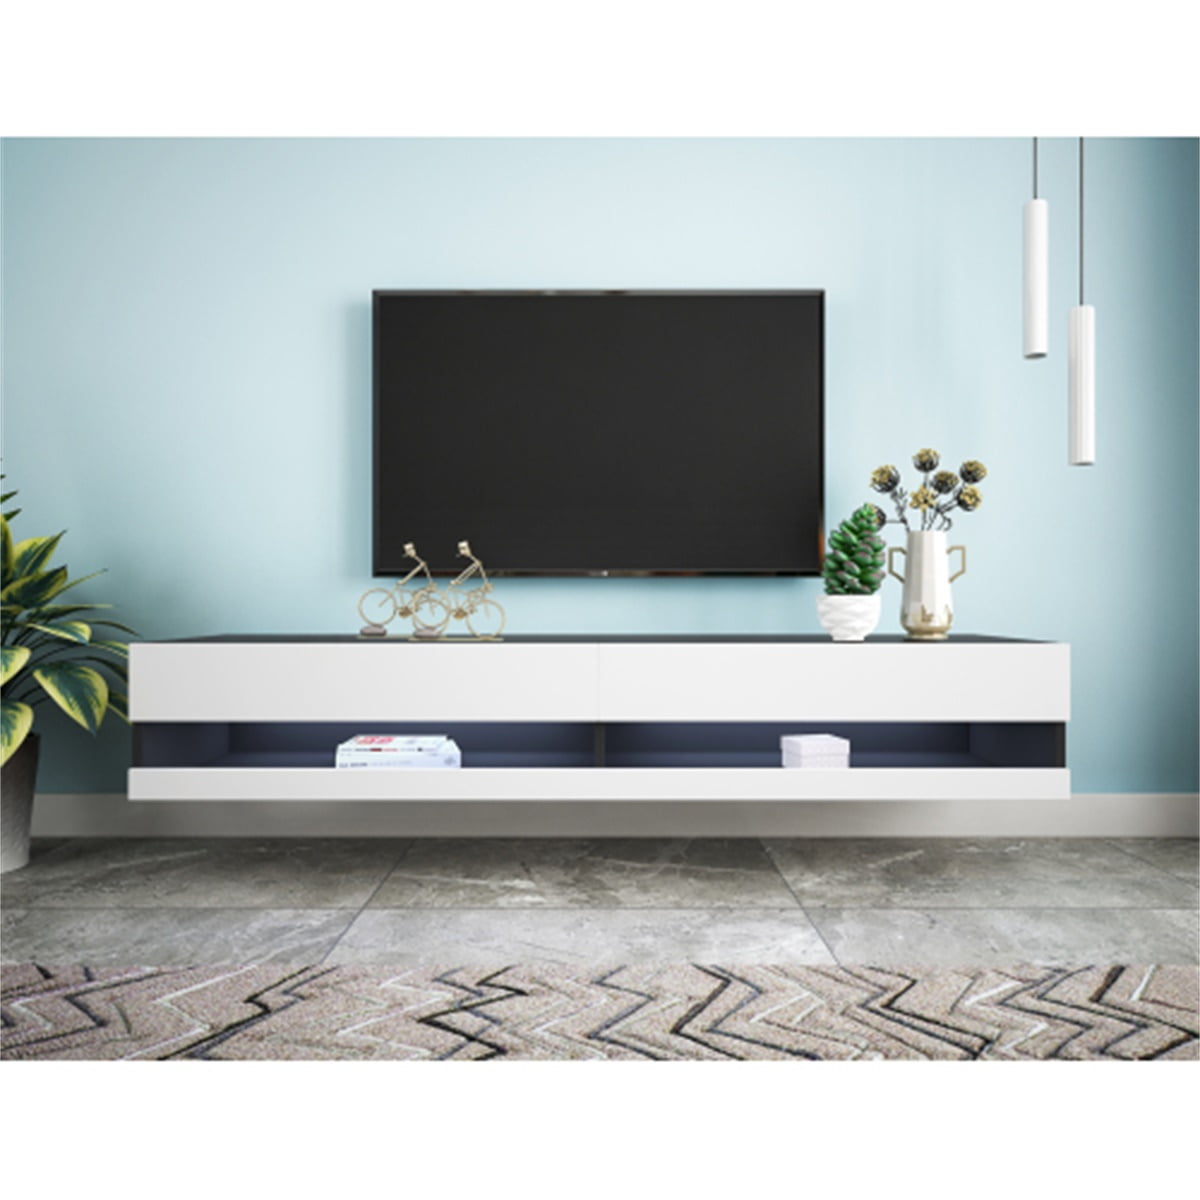 Details about   TV Stand White Floating Wall Mount Shelf Media Console Unit Entertainment Center 